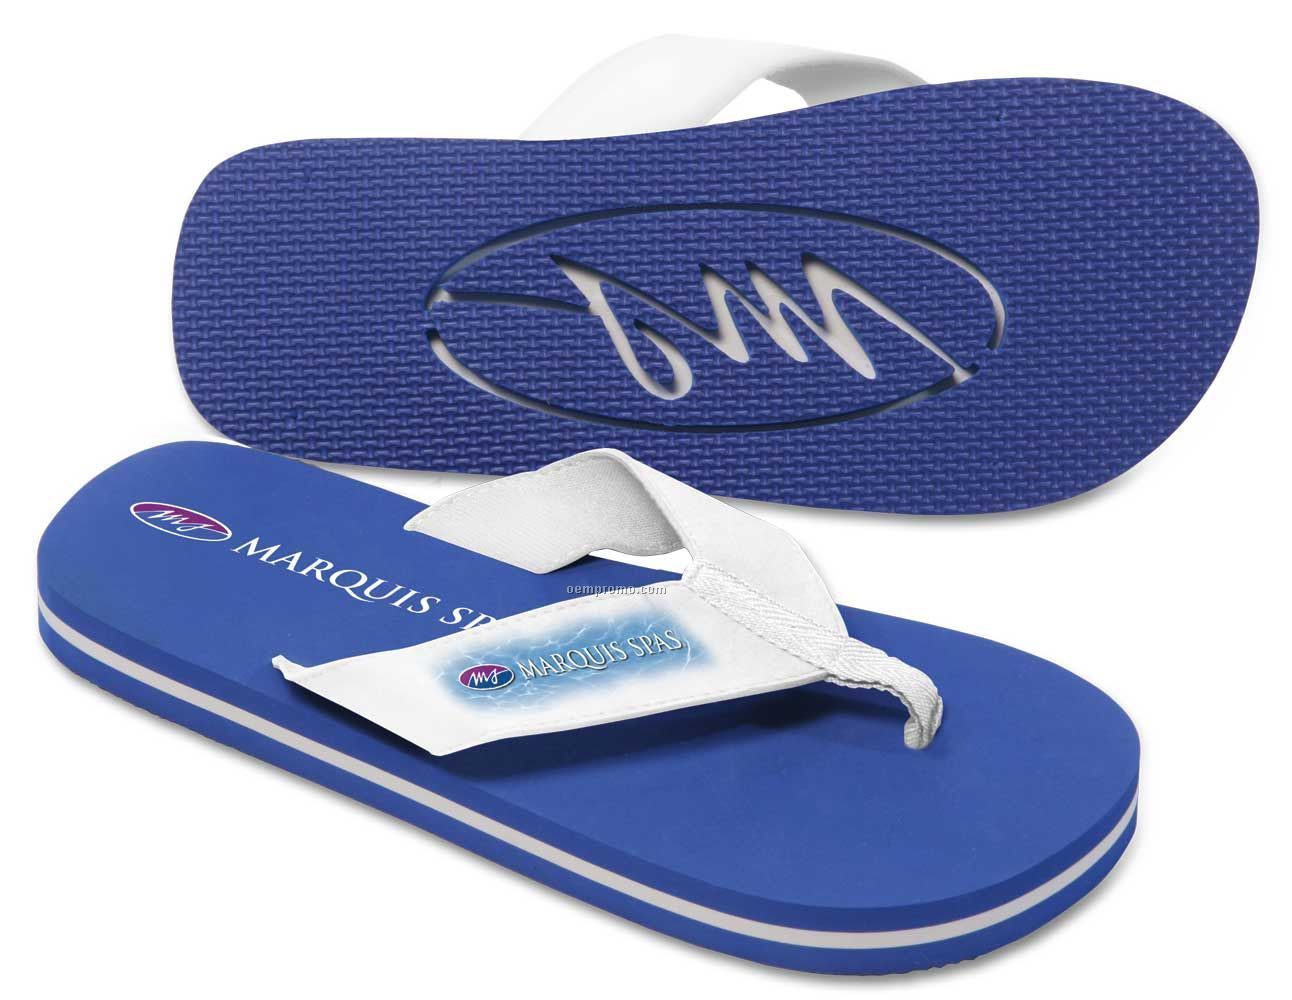 Malibu Surf Style Flip Flop With Fabric-lined Straps